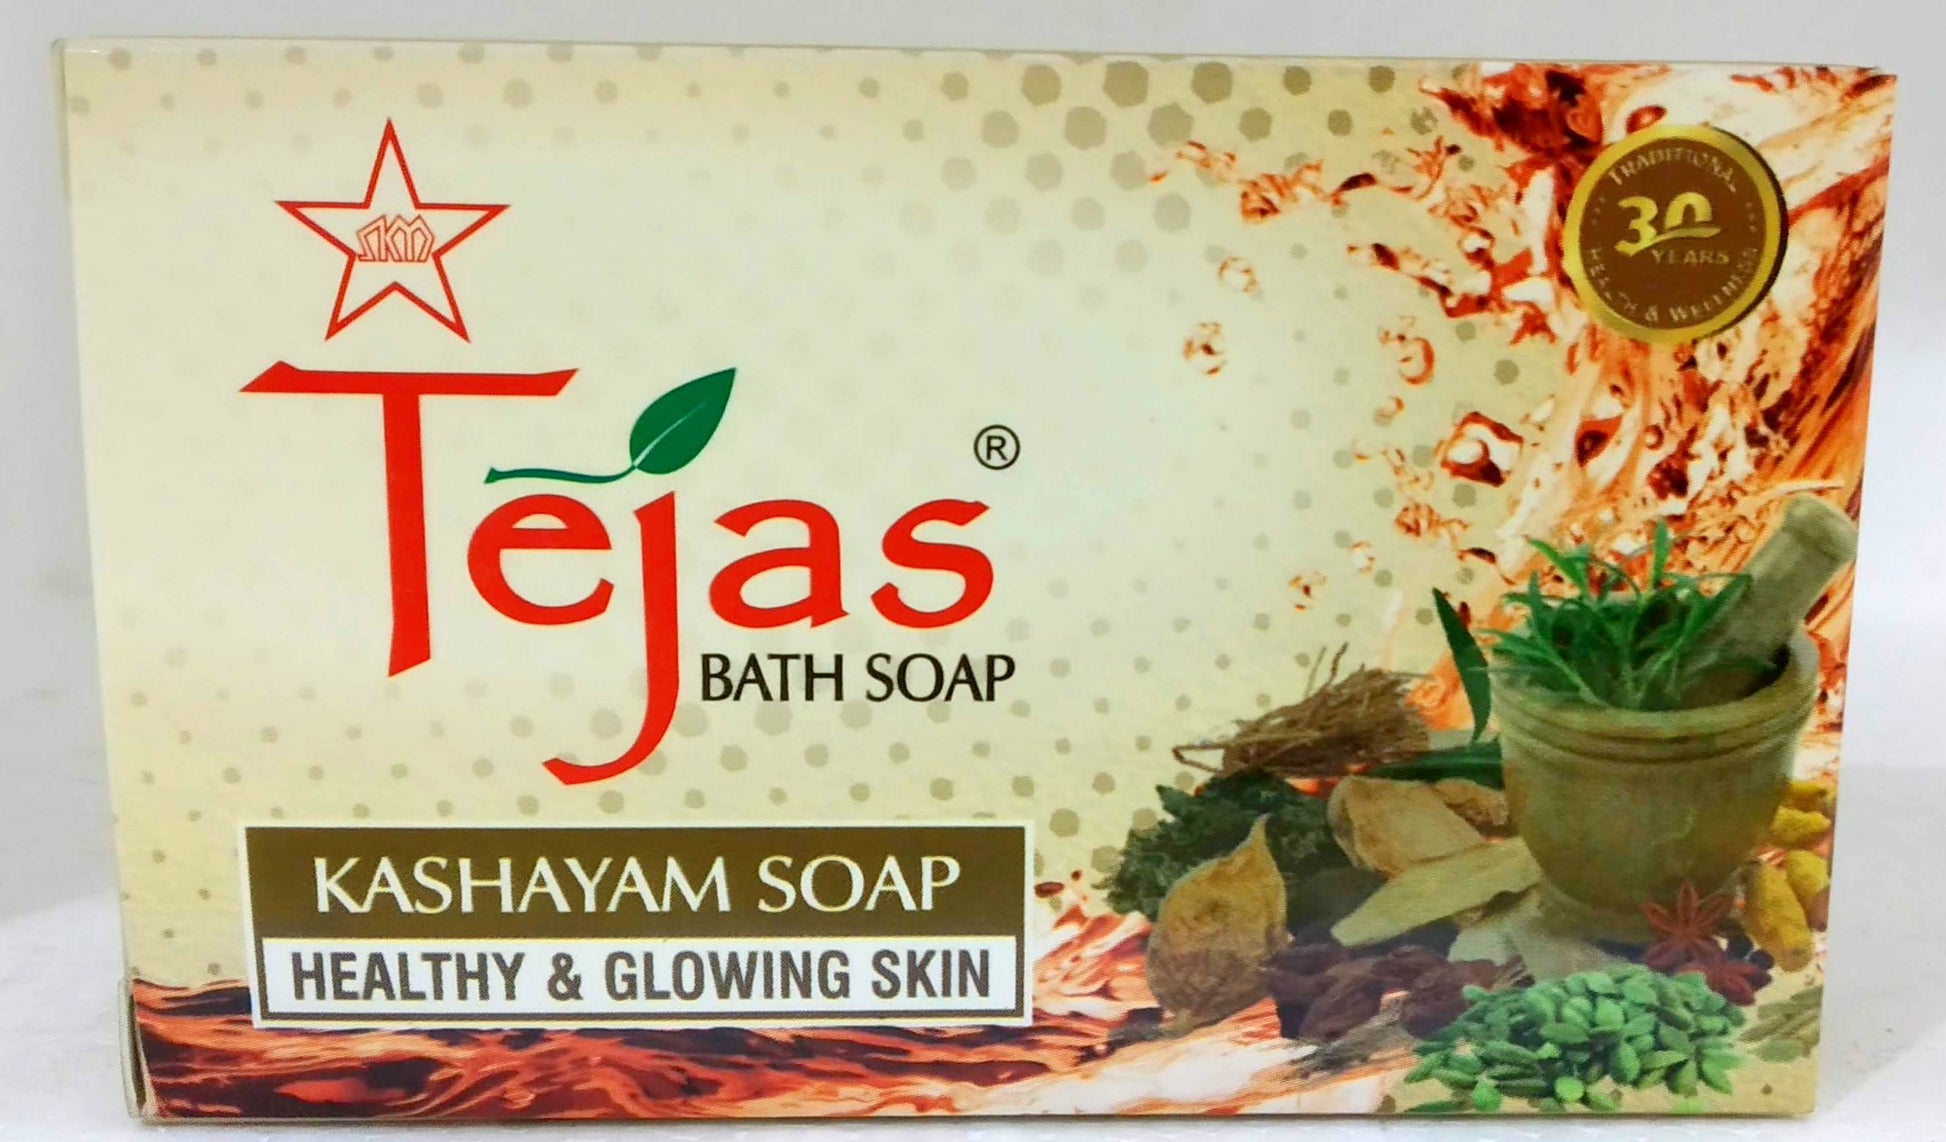 Shop Tejas Kashayam Soap 75g at price 60.00 from SKM Online - Ayush Care